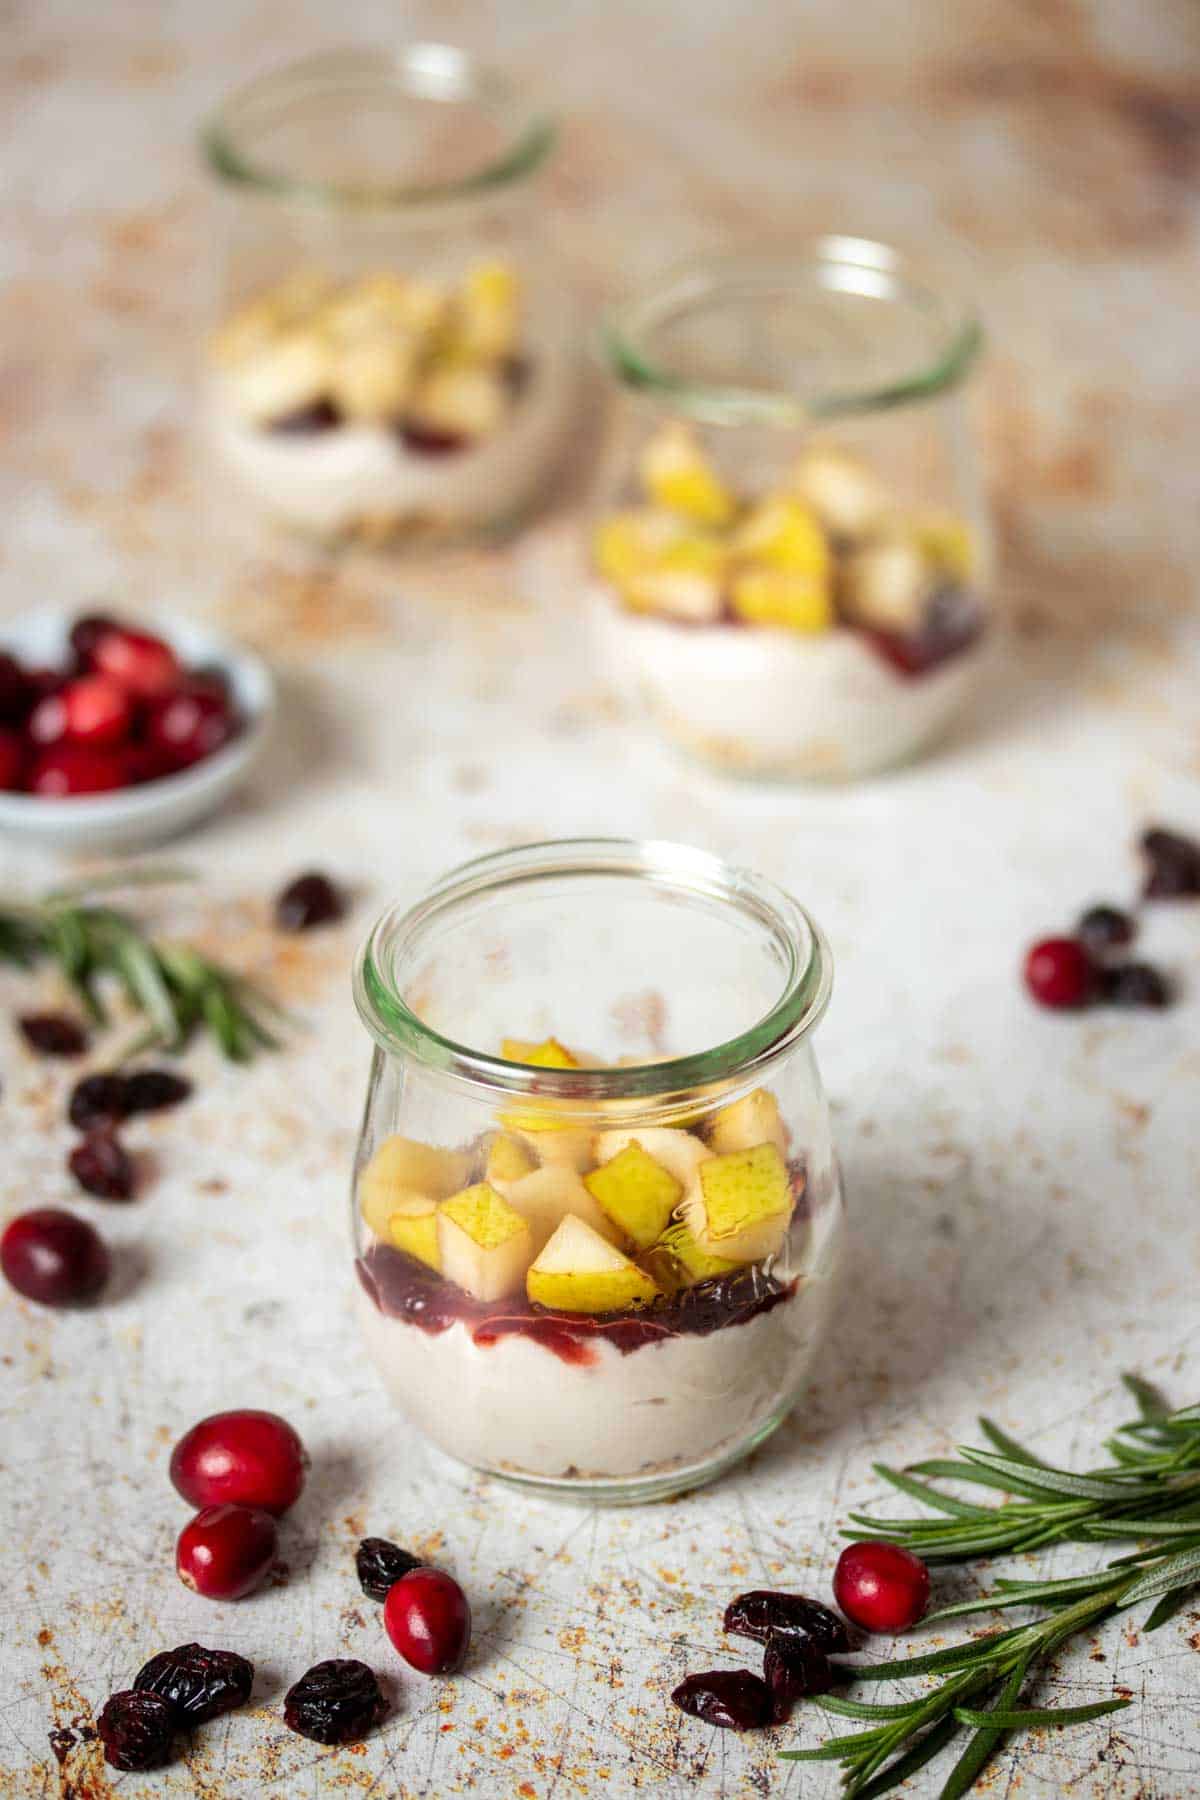 Yogurt, jelly and fruit layered in a glass jar in front of two other jars and cranberries and rosemary sprigs laying next to it.